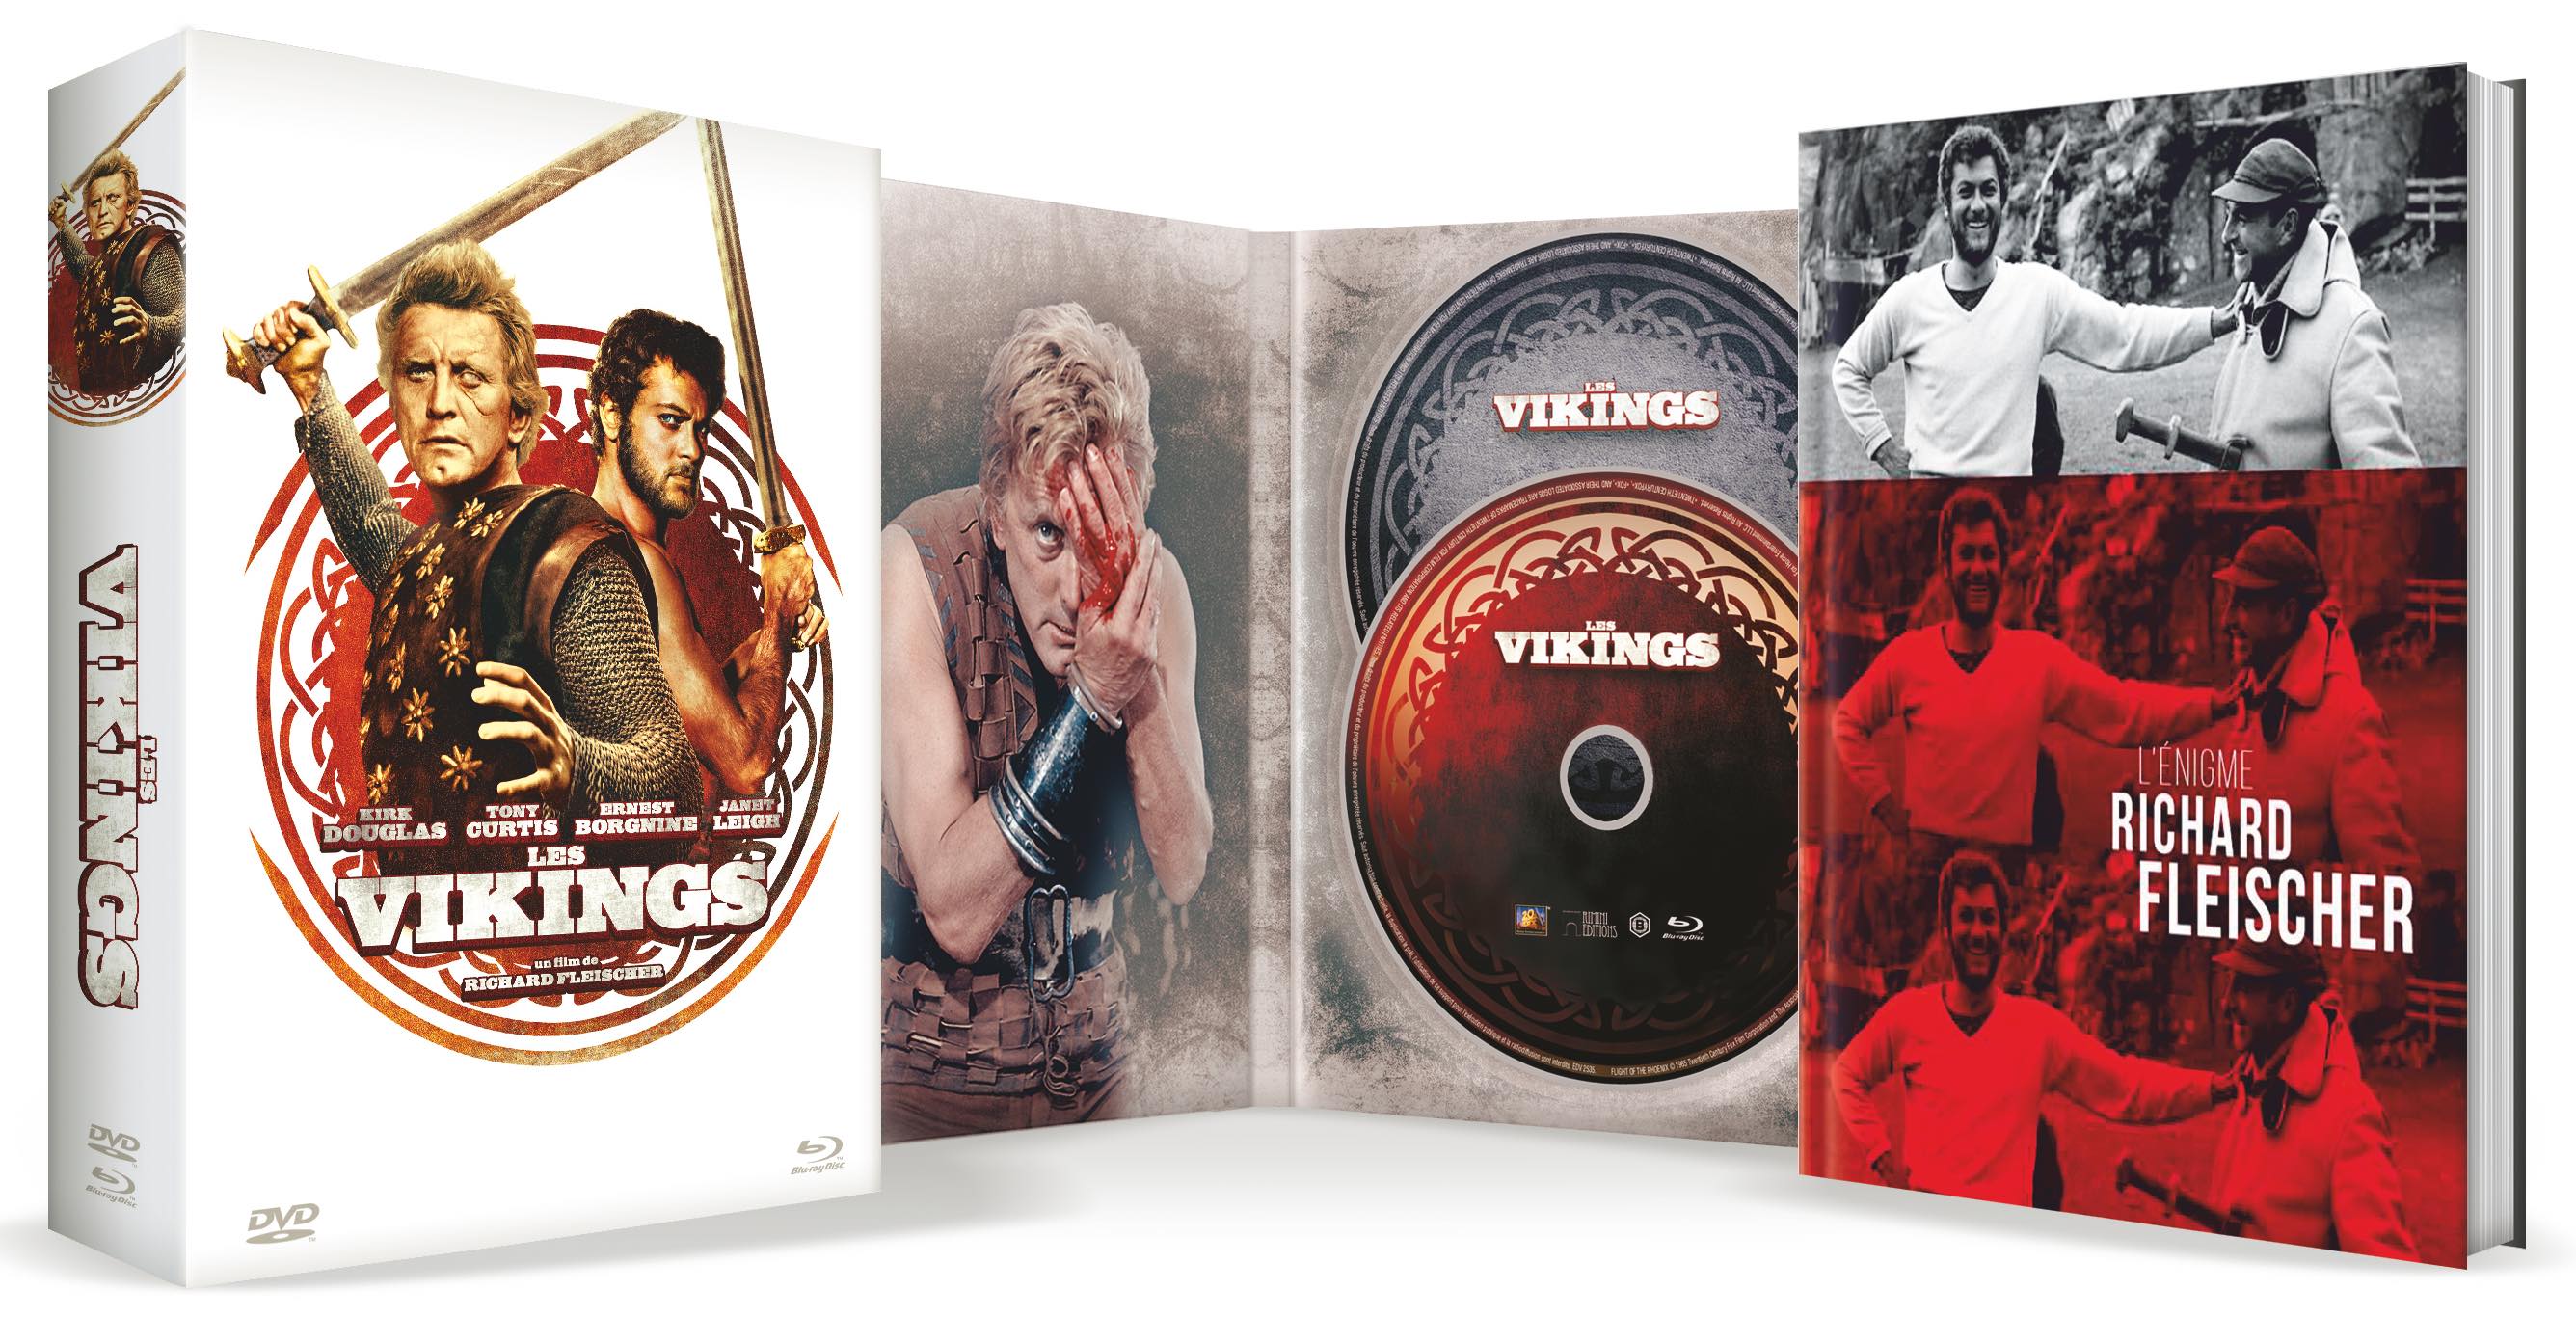 Les Vikings (1958) - Édition Collector Blu-ray + DVD + Livre